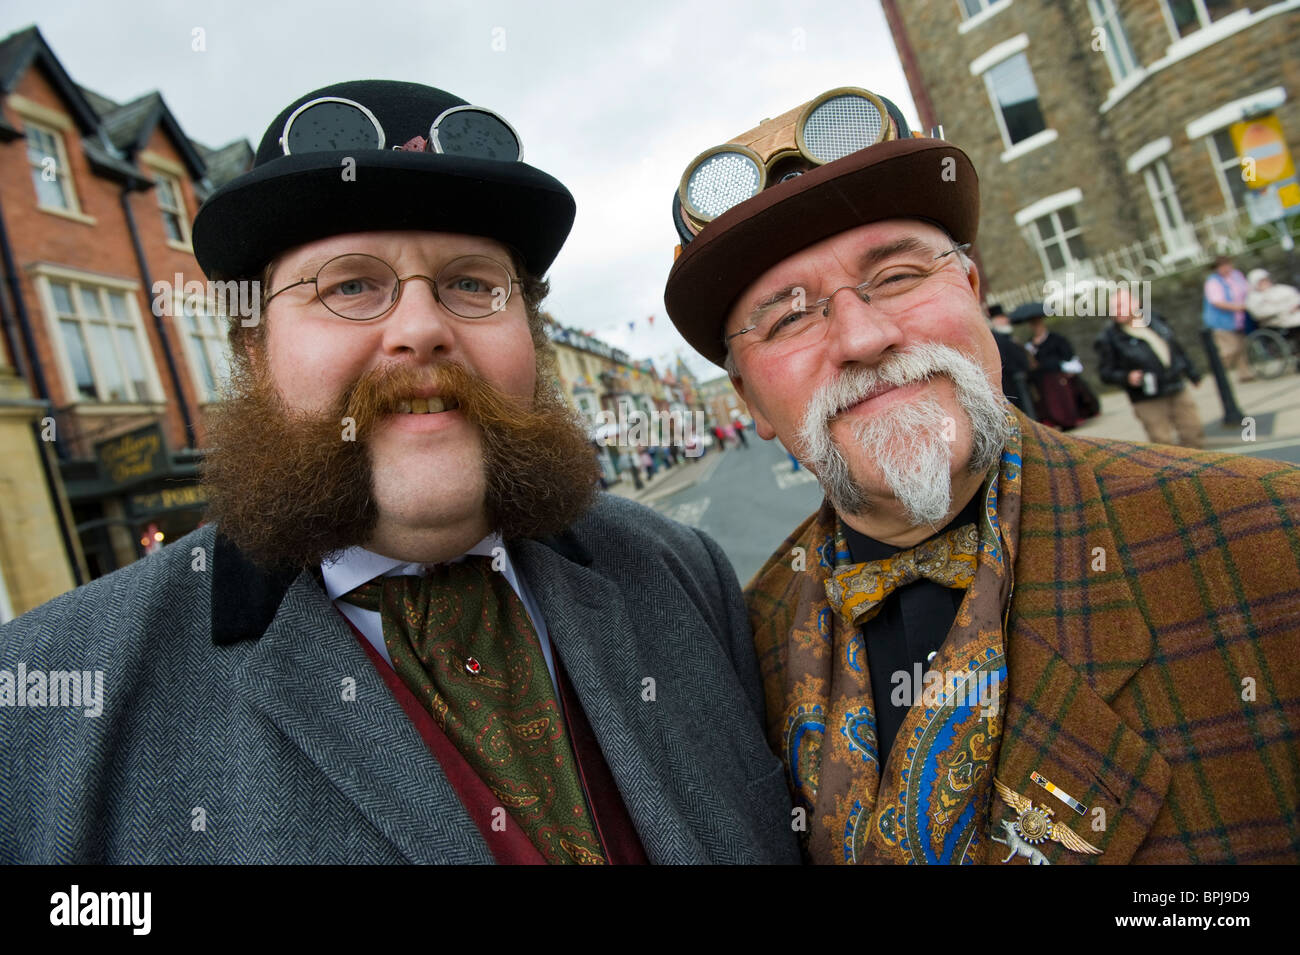 Gentlemen in period costume at the annual Victorian Festival in Llandrindod Wells Powys Mid Wales UK Stock Photo